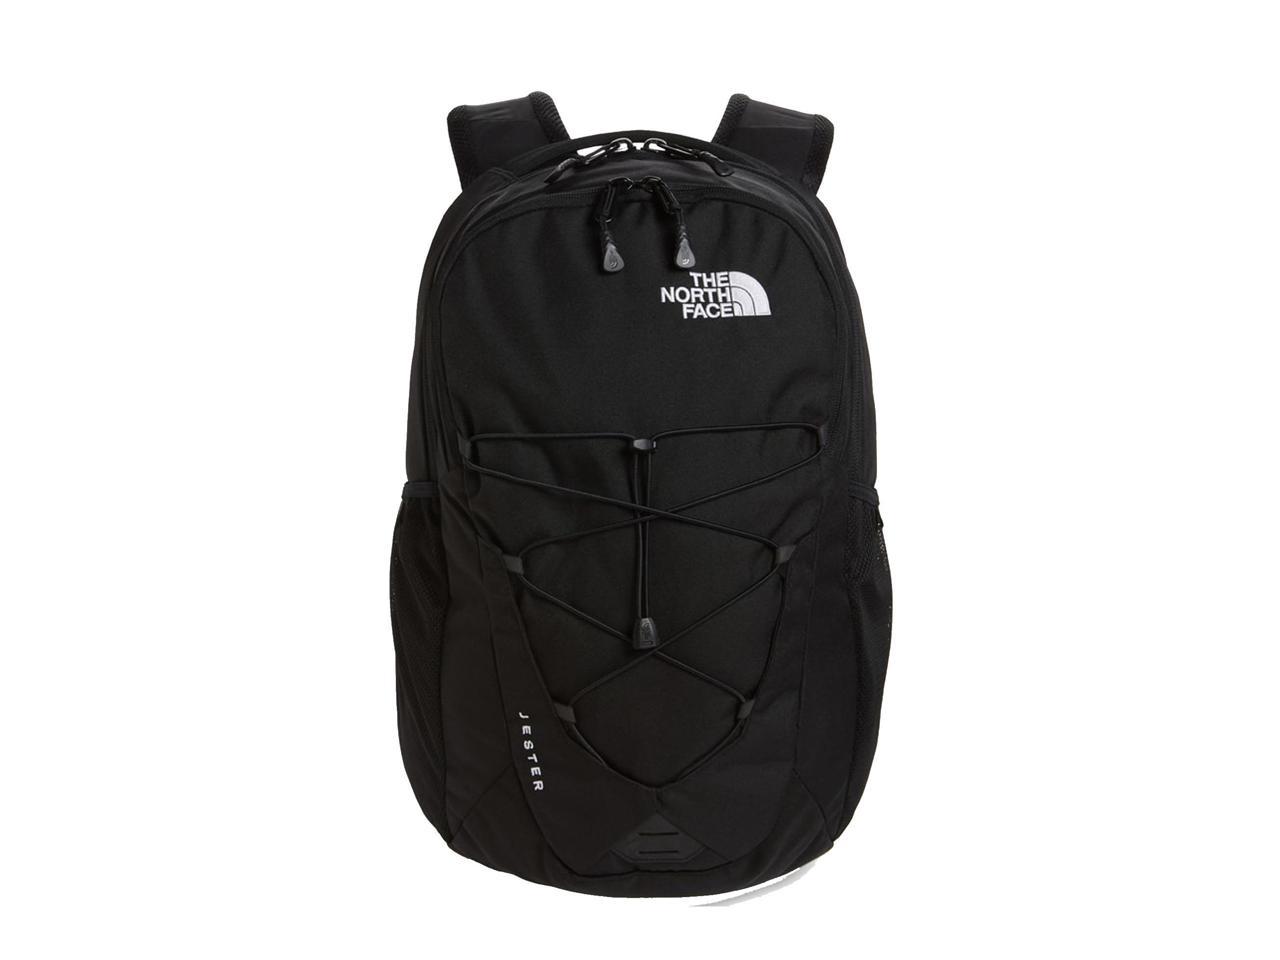 jester backpack dimensions